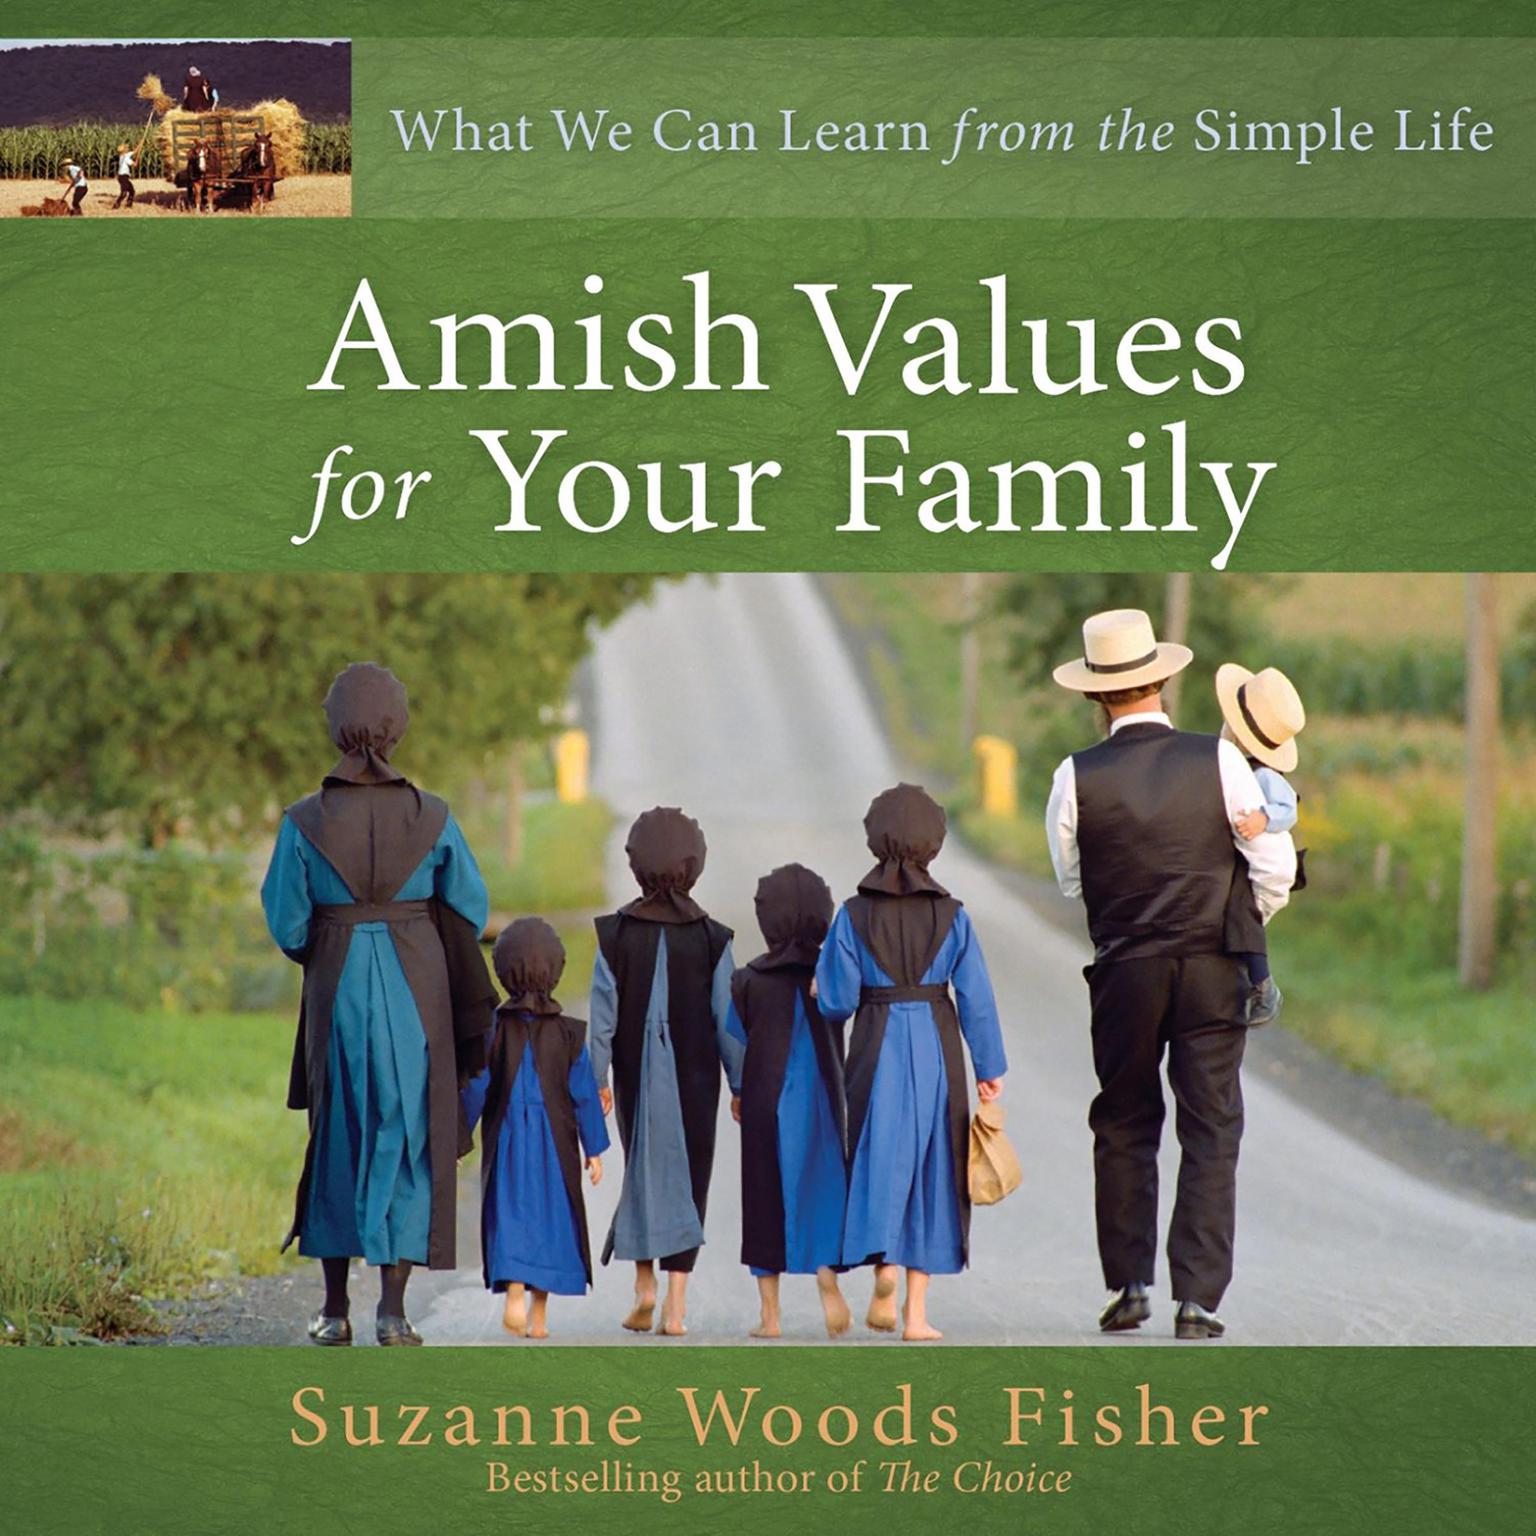 Amish Values for Your Family: What We Can Learn from the Simple Life Audiobook, by Suzanne Woods Fisher